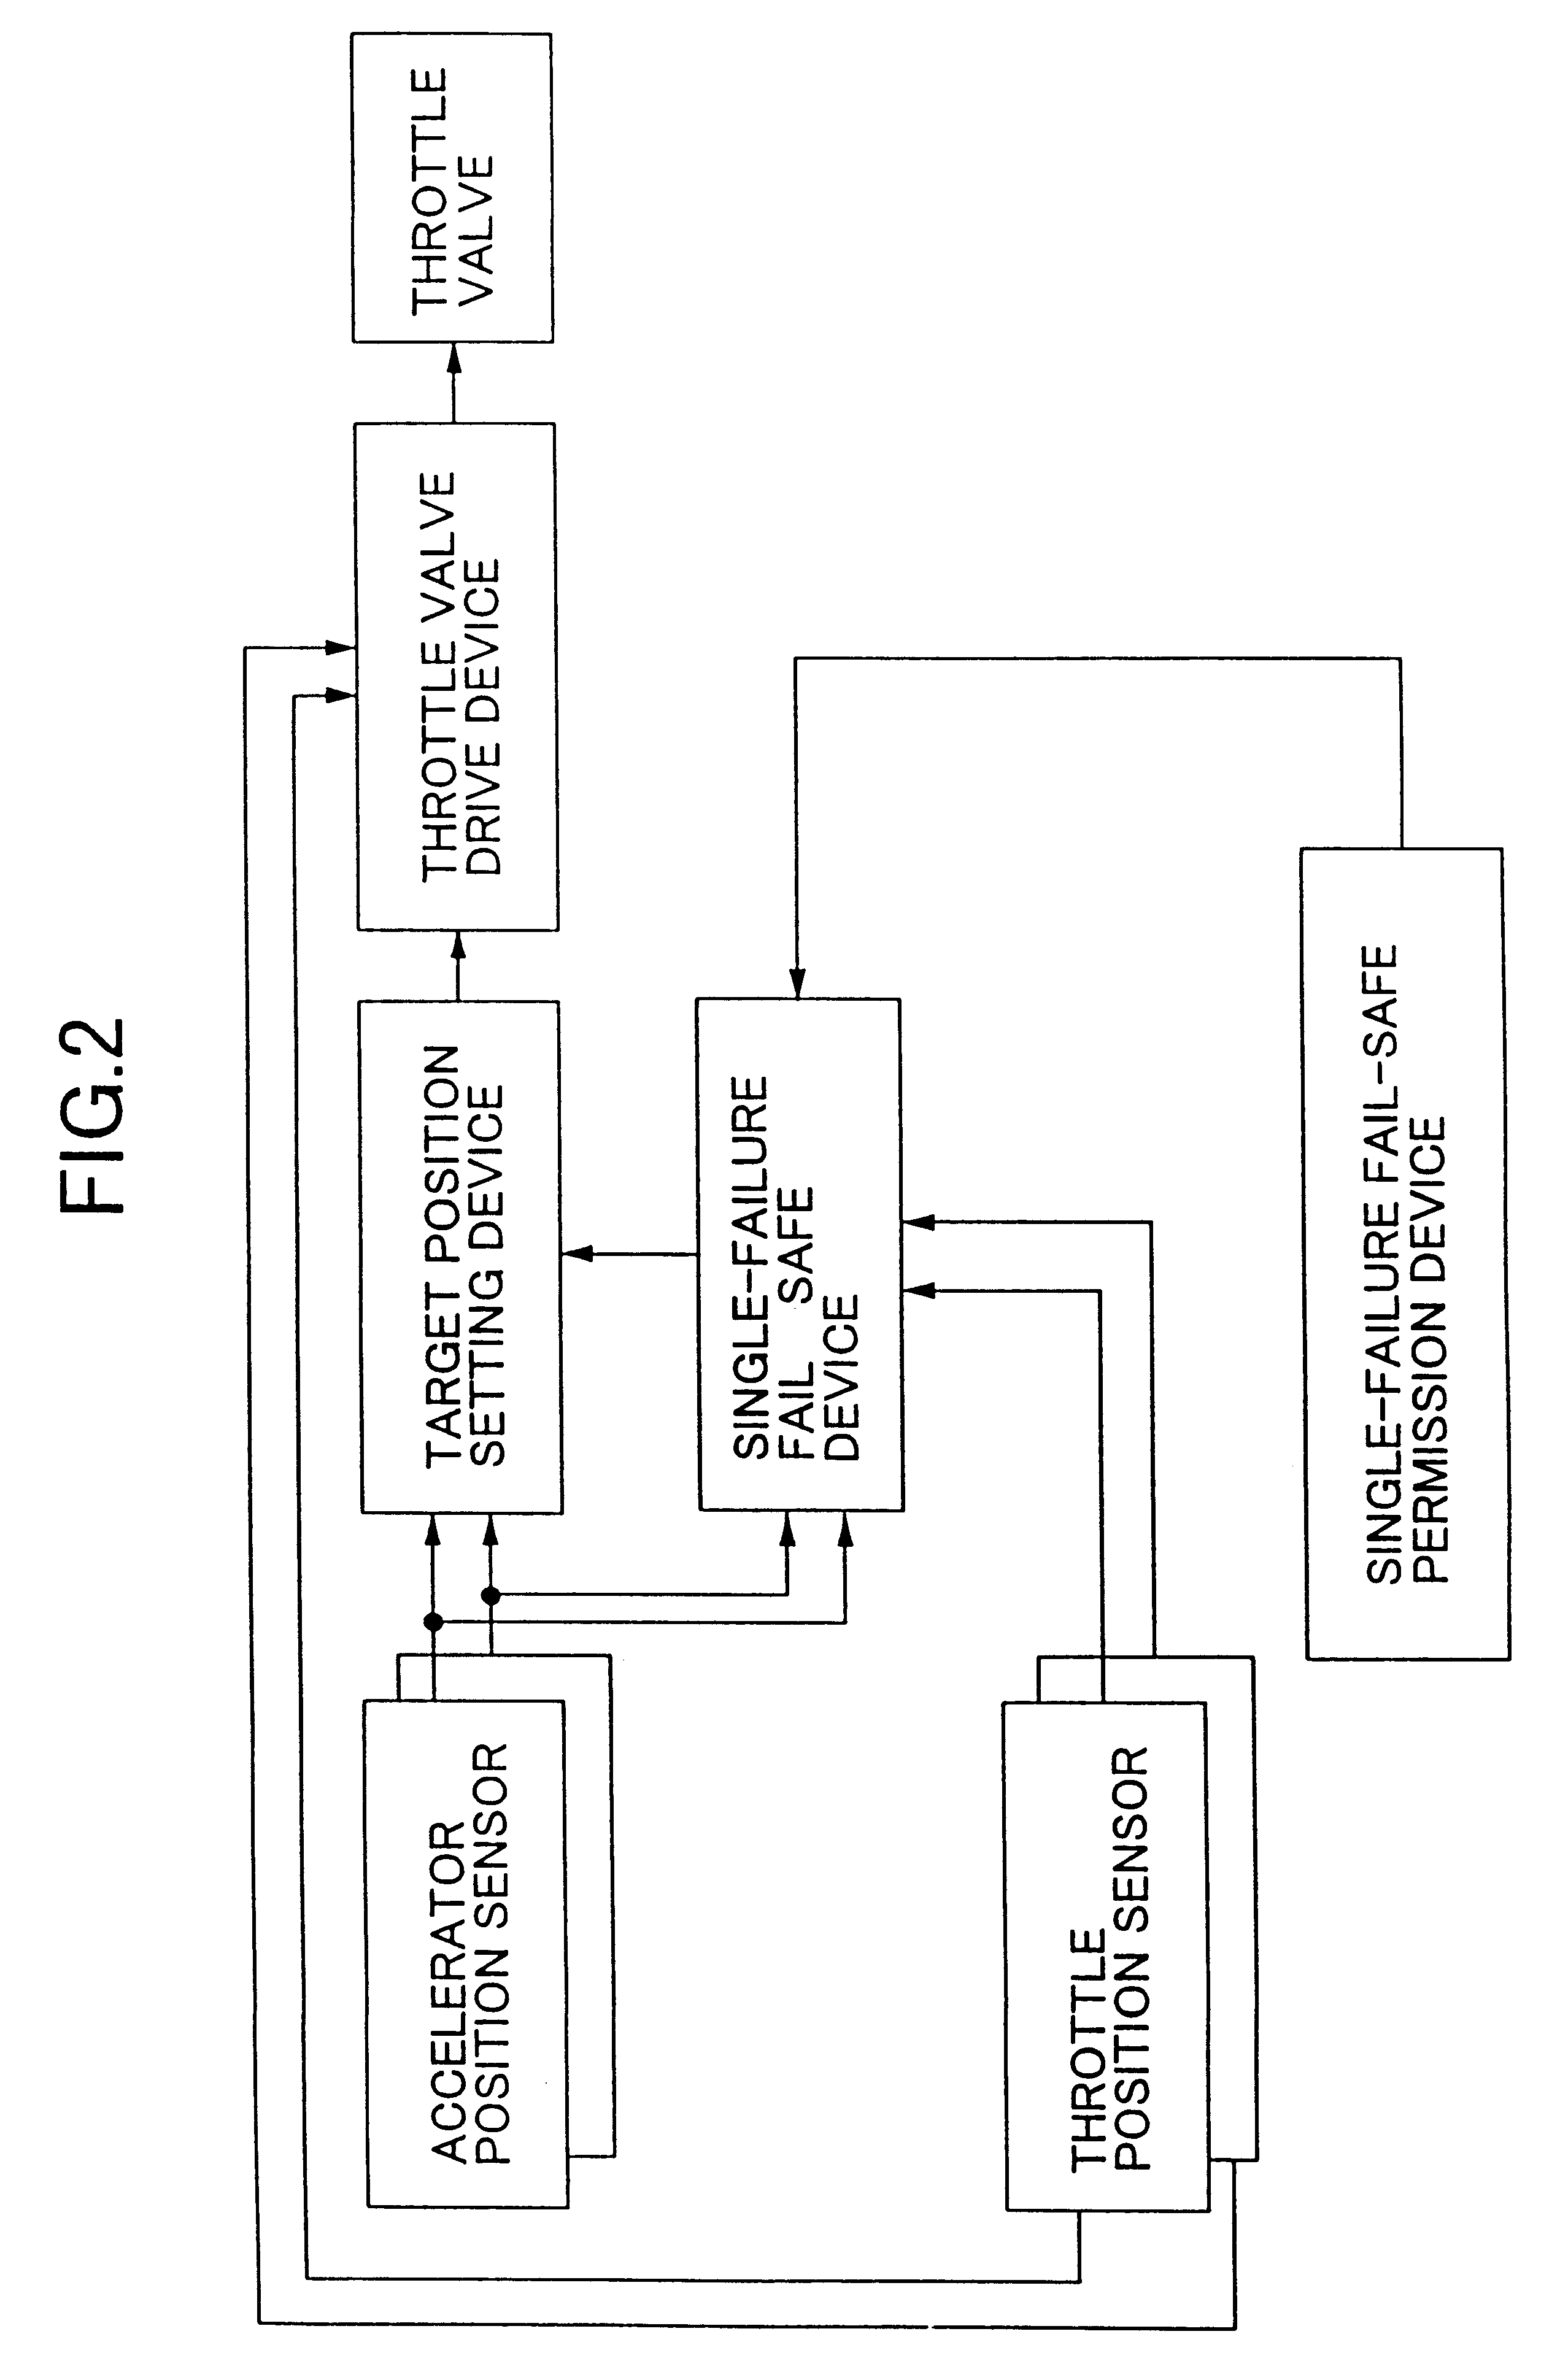 Method and apparatus for fail safe control of an electronically controlled throttle valve of an internal combustion engine